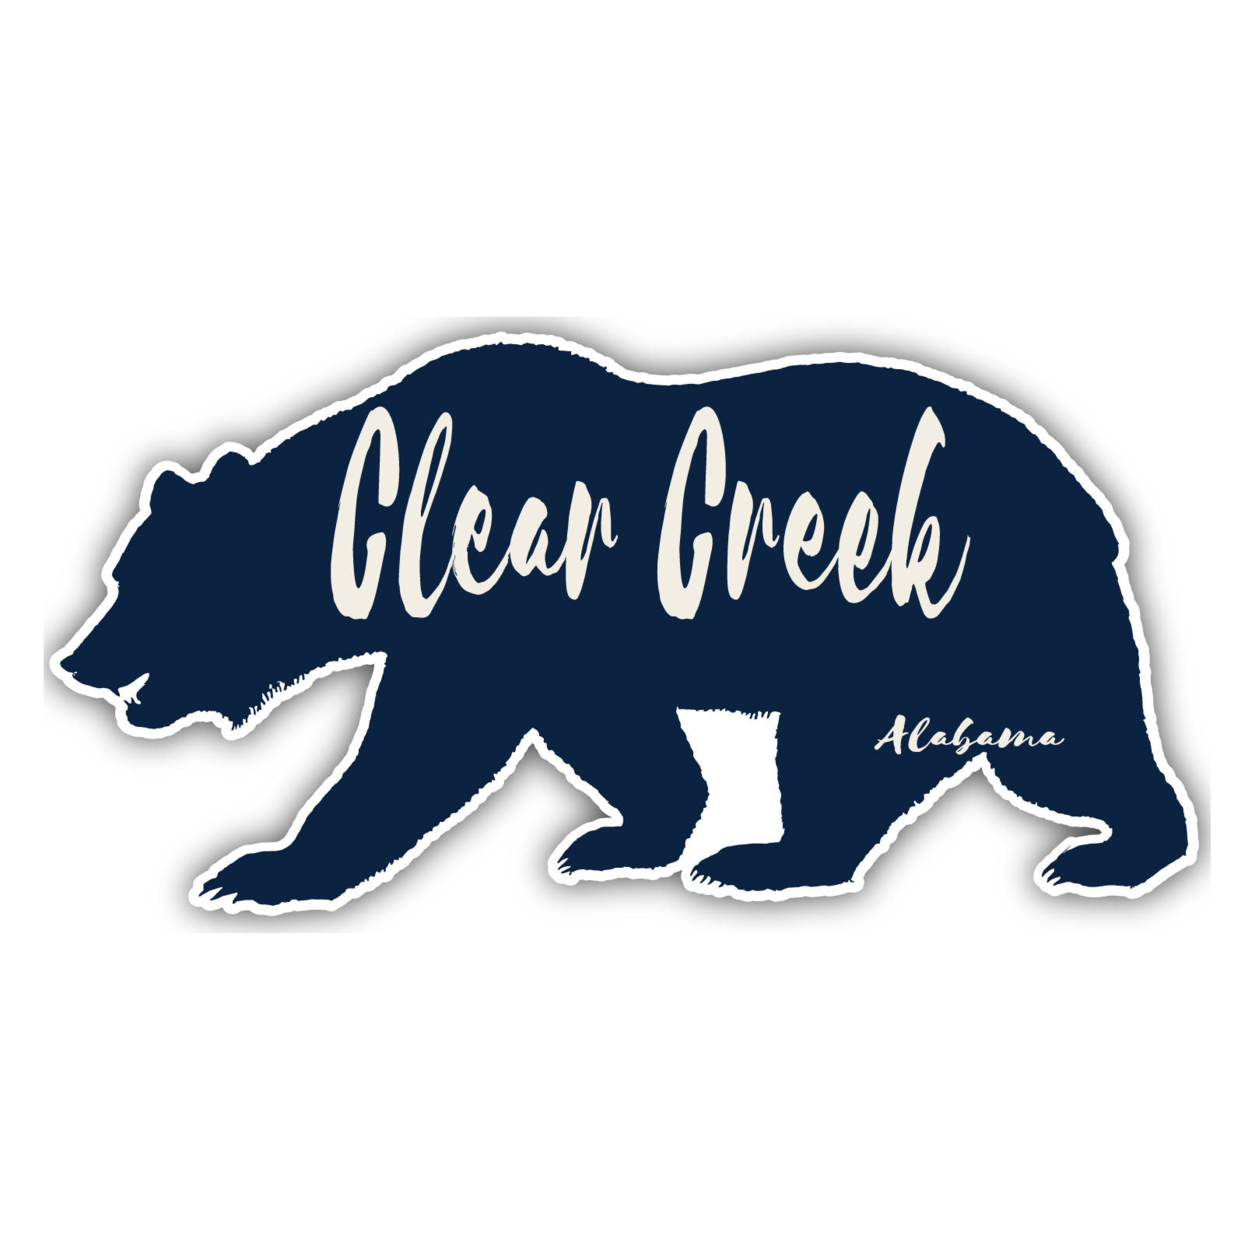 Clear Creek Alabama Souvenir Decorative Stickers (Choose Theme And Size) - 4-Pack, 2-Inch, Adventures Awaits